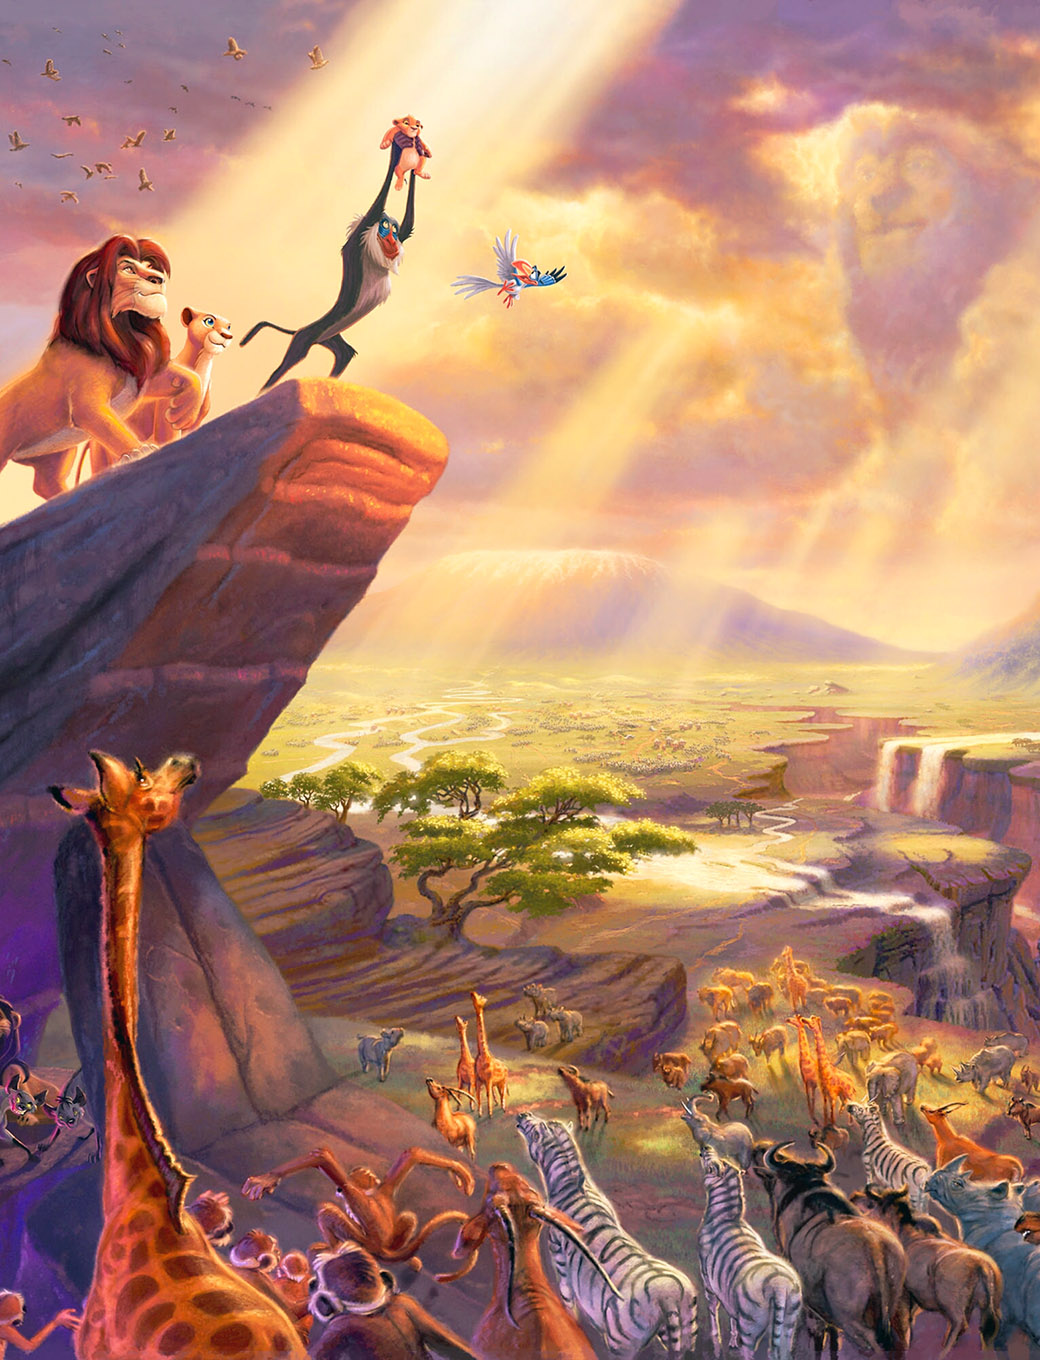 The Lion King for ios download free